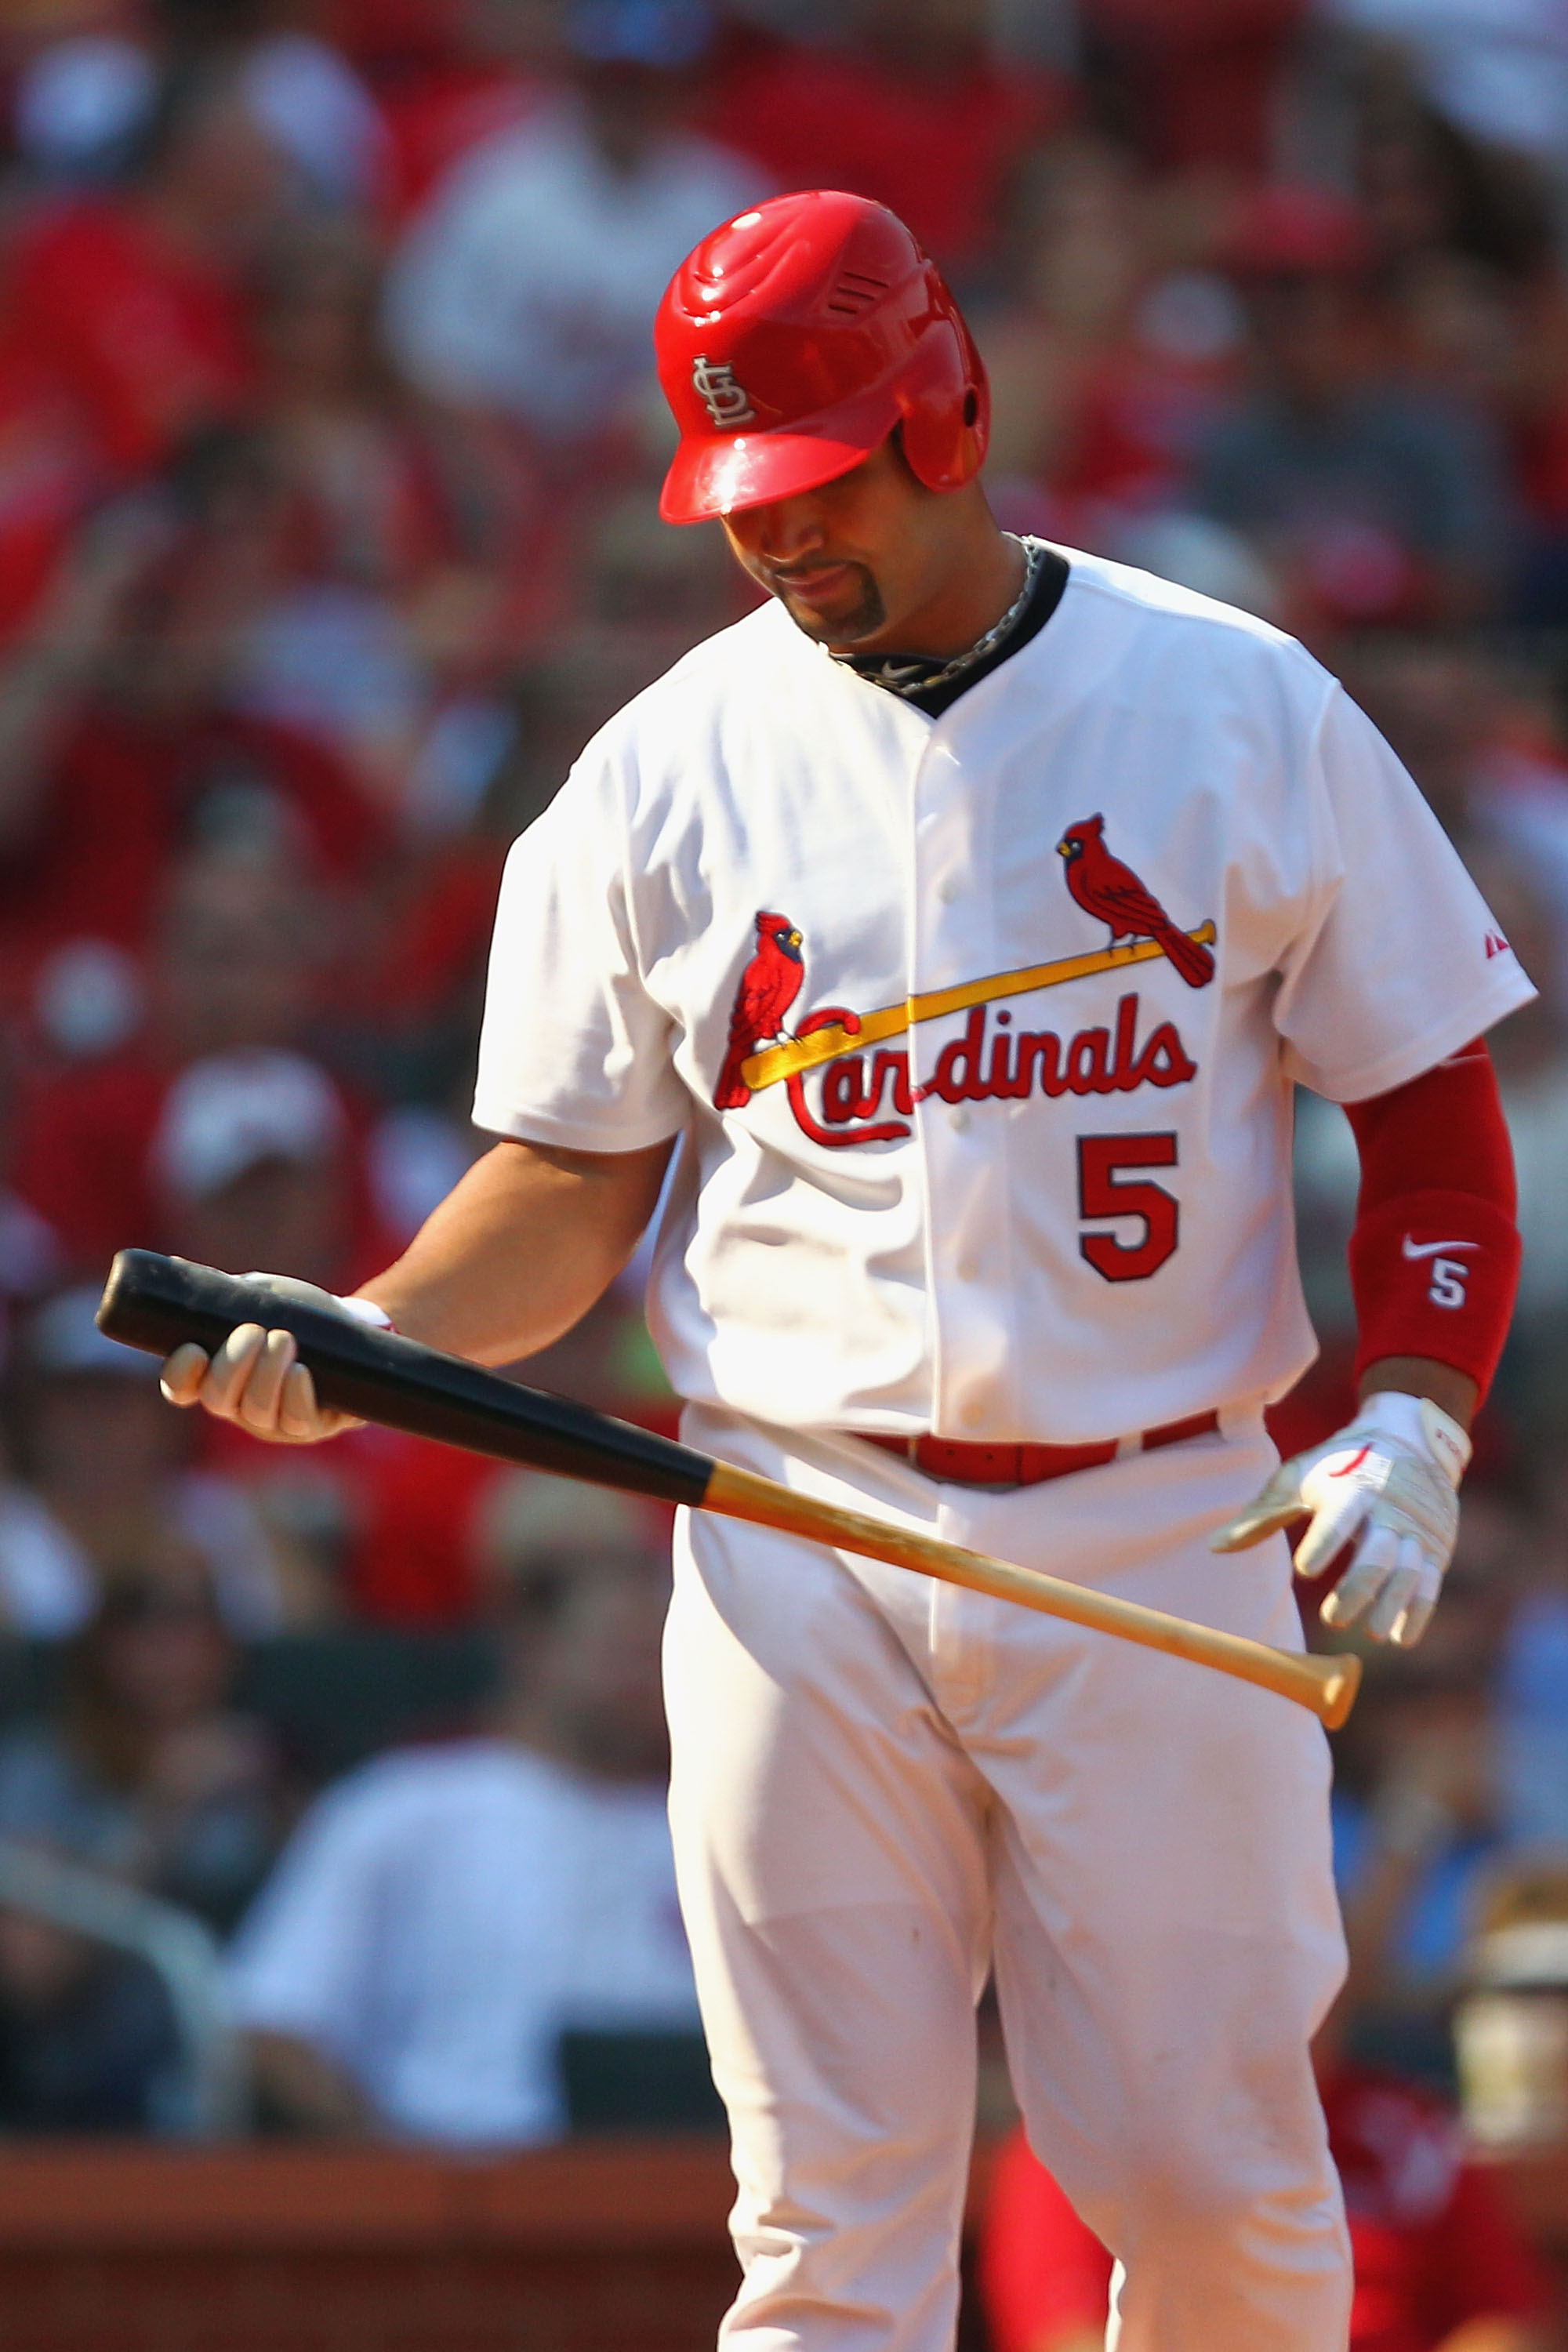 Albert Pujols: 10 Reasons He Should Stay With the St. Louis